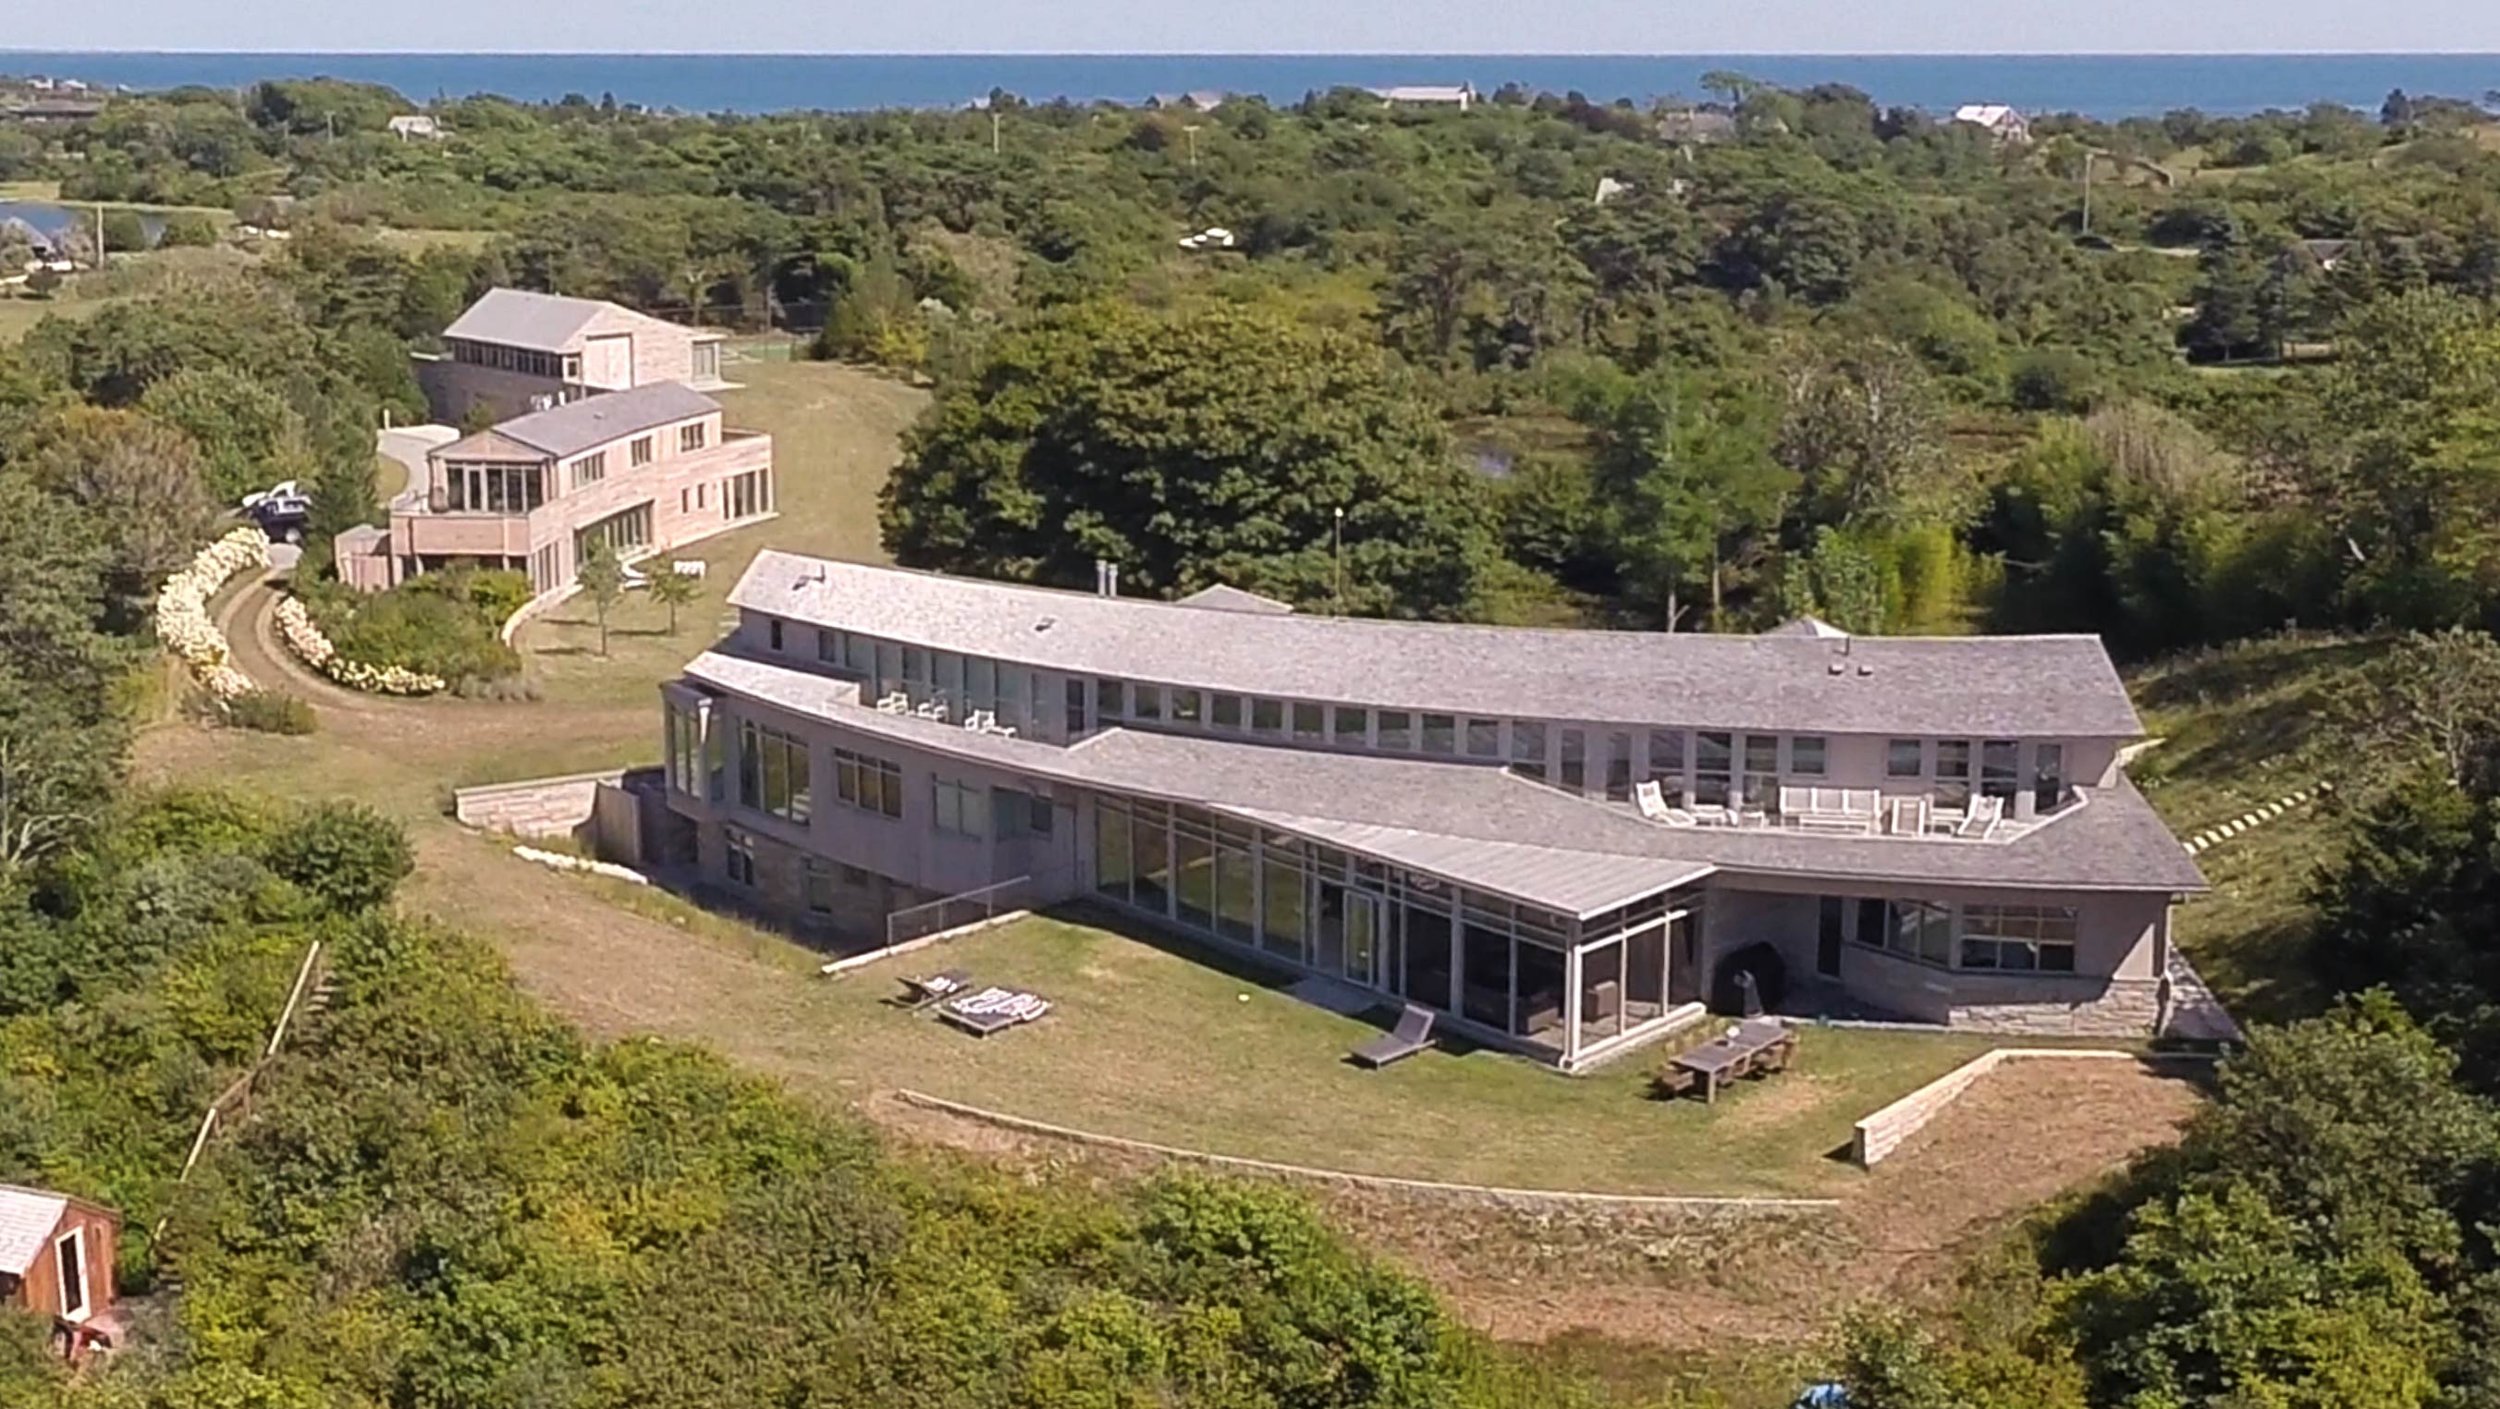 A Martha's Vineyard mansion with accessory structures